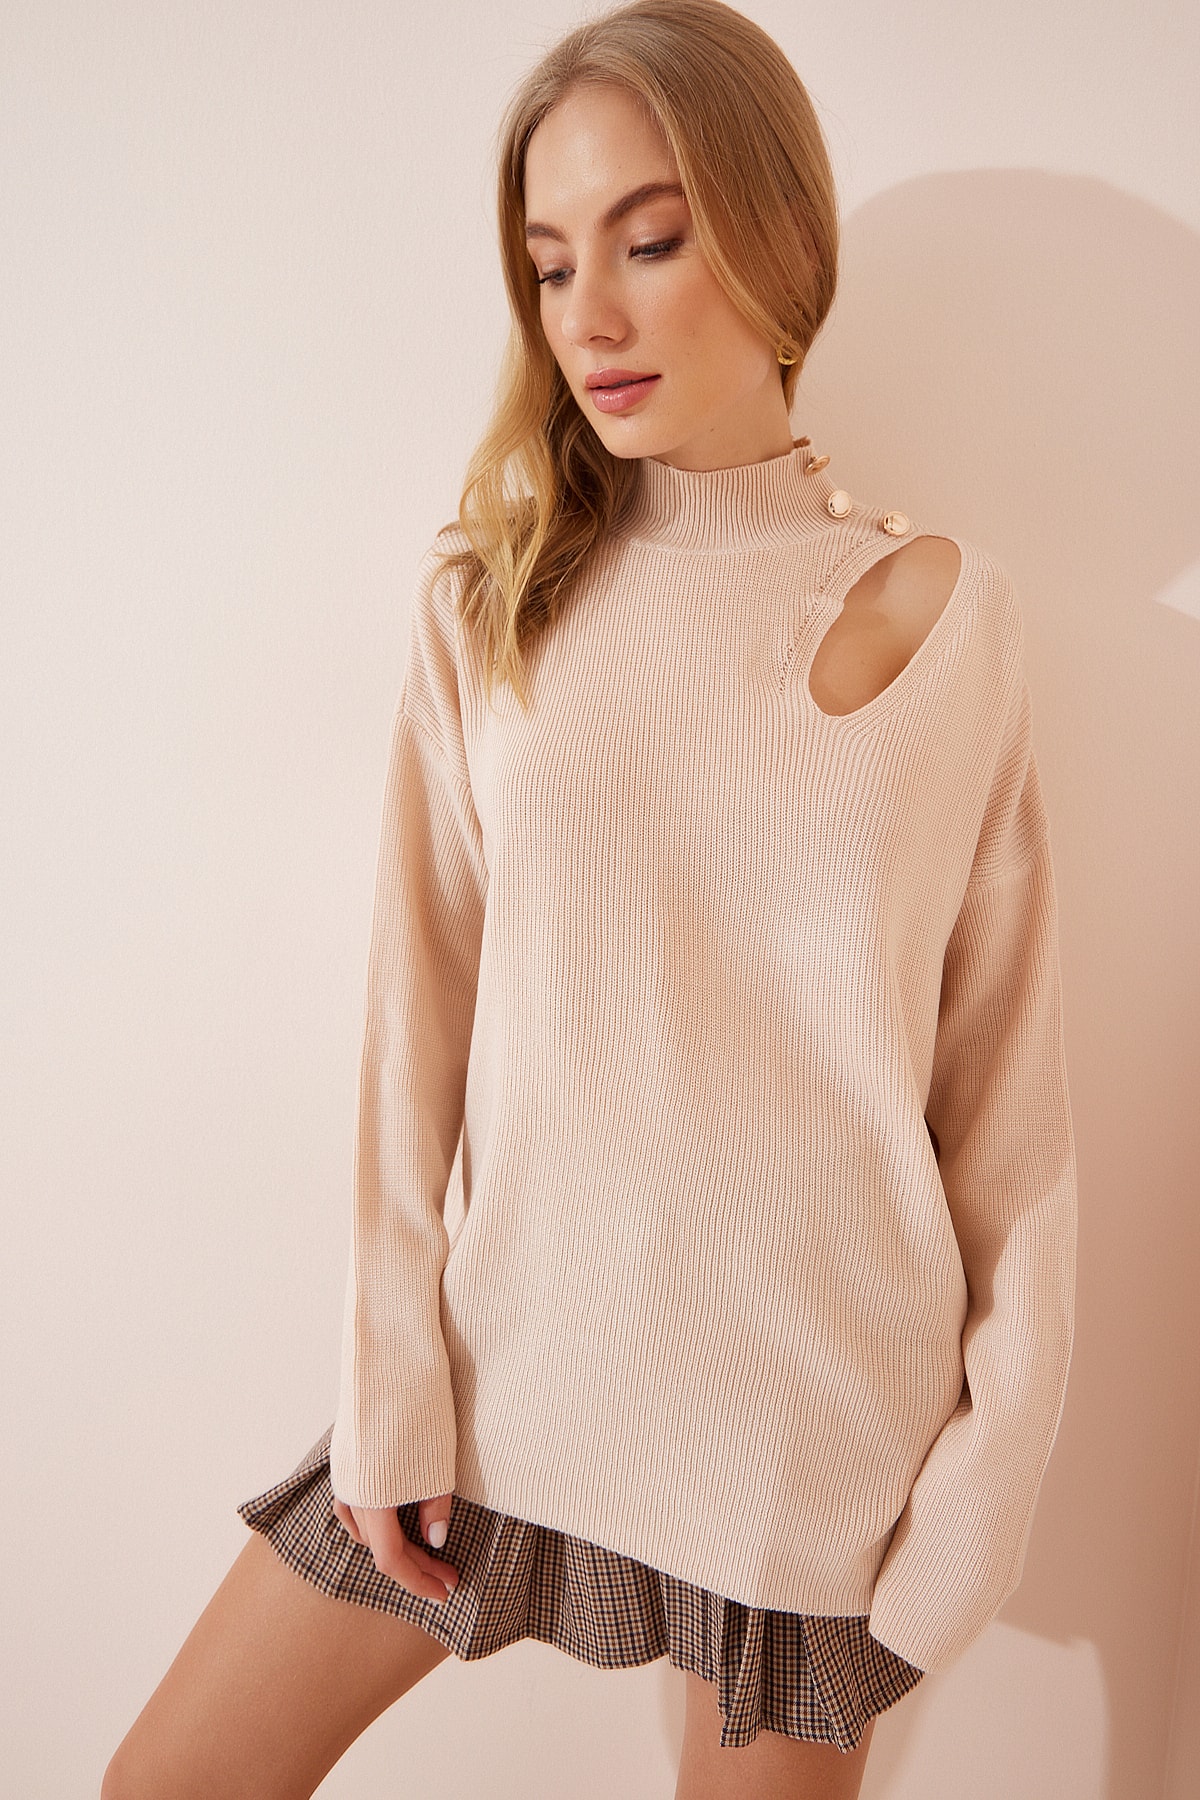 Happiness İstanbul Women's Vanilla Cut Out Detail Knitwear Sweater